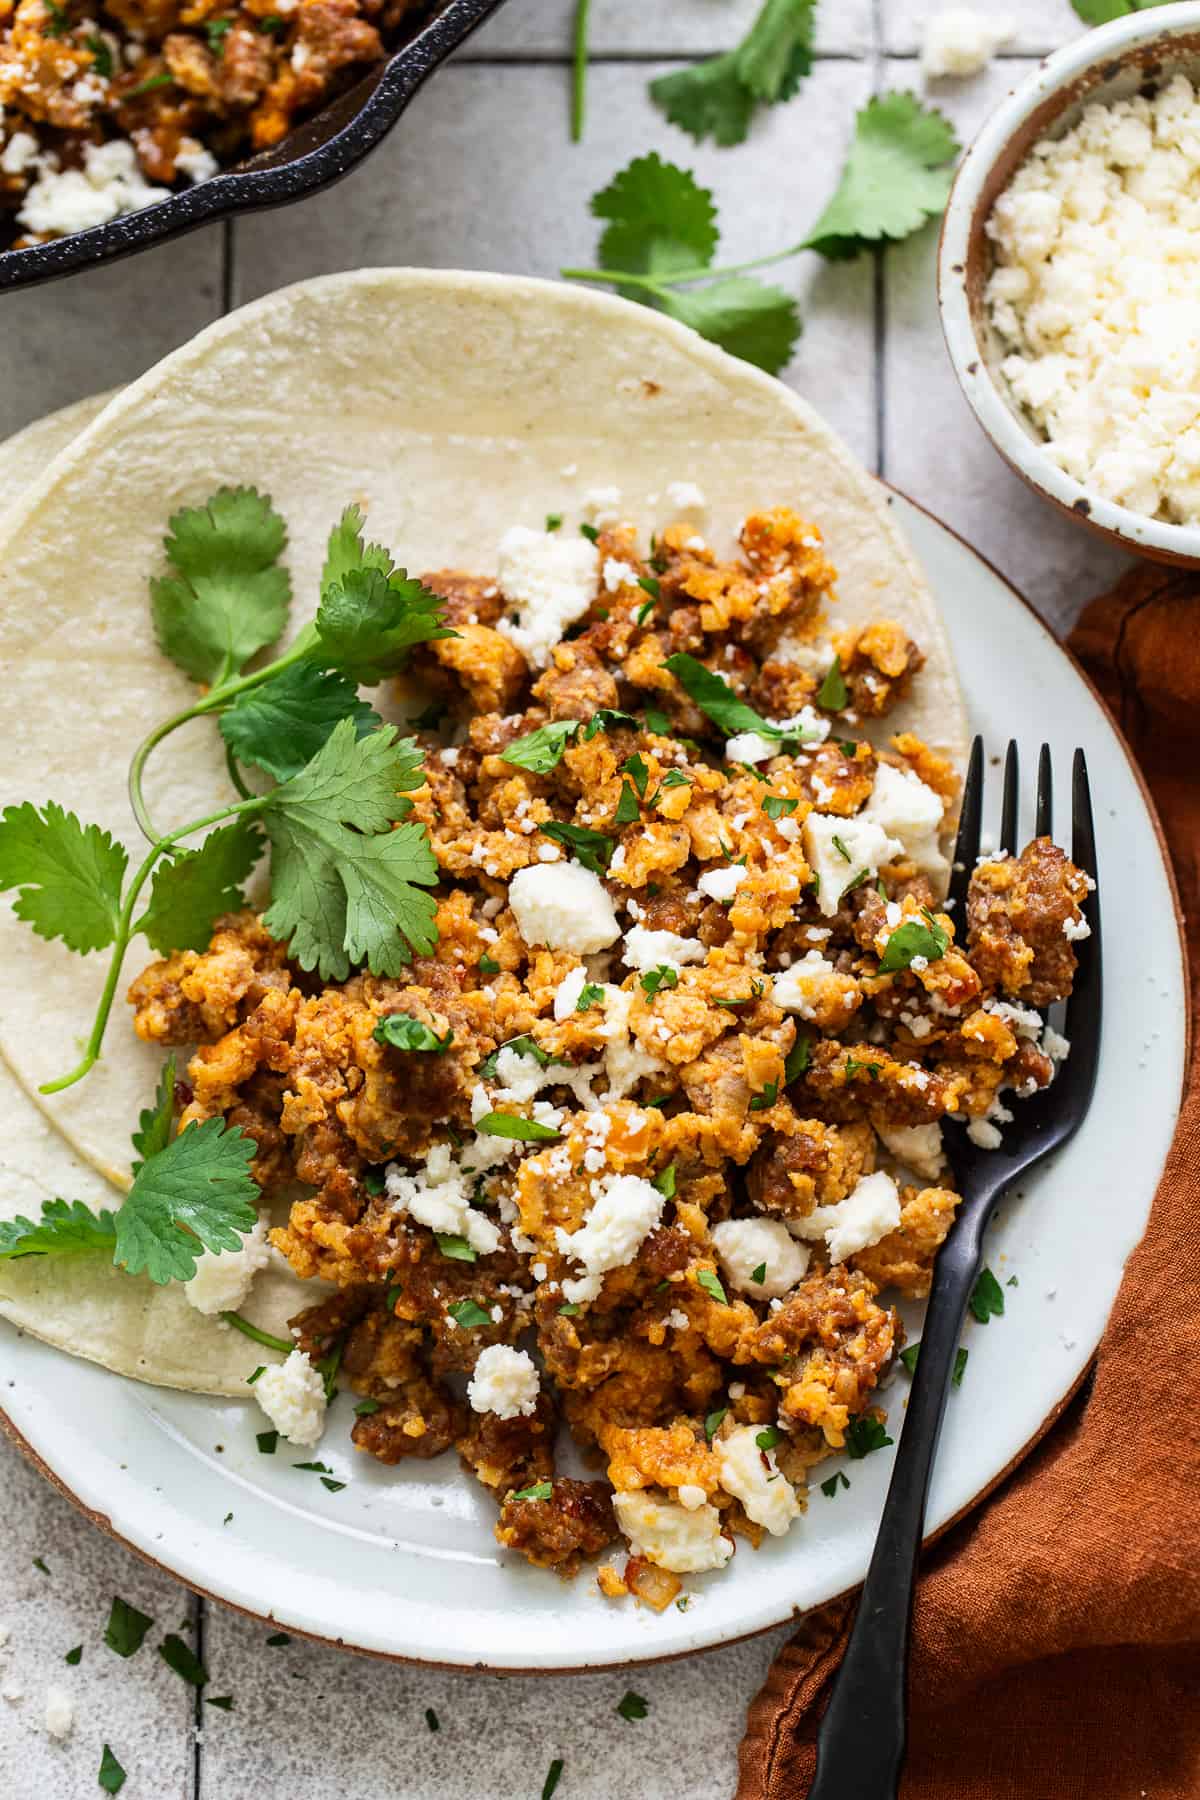 Chorizo and eggs on corn tortillas served with crumbled queso fresco and cilantro.